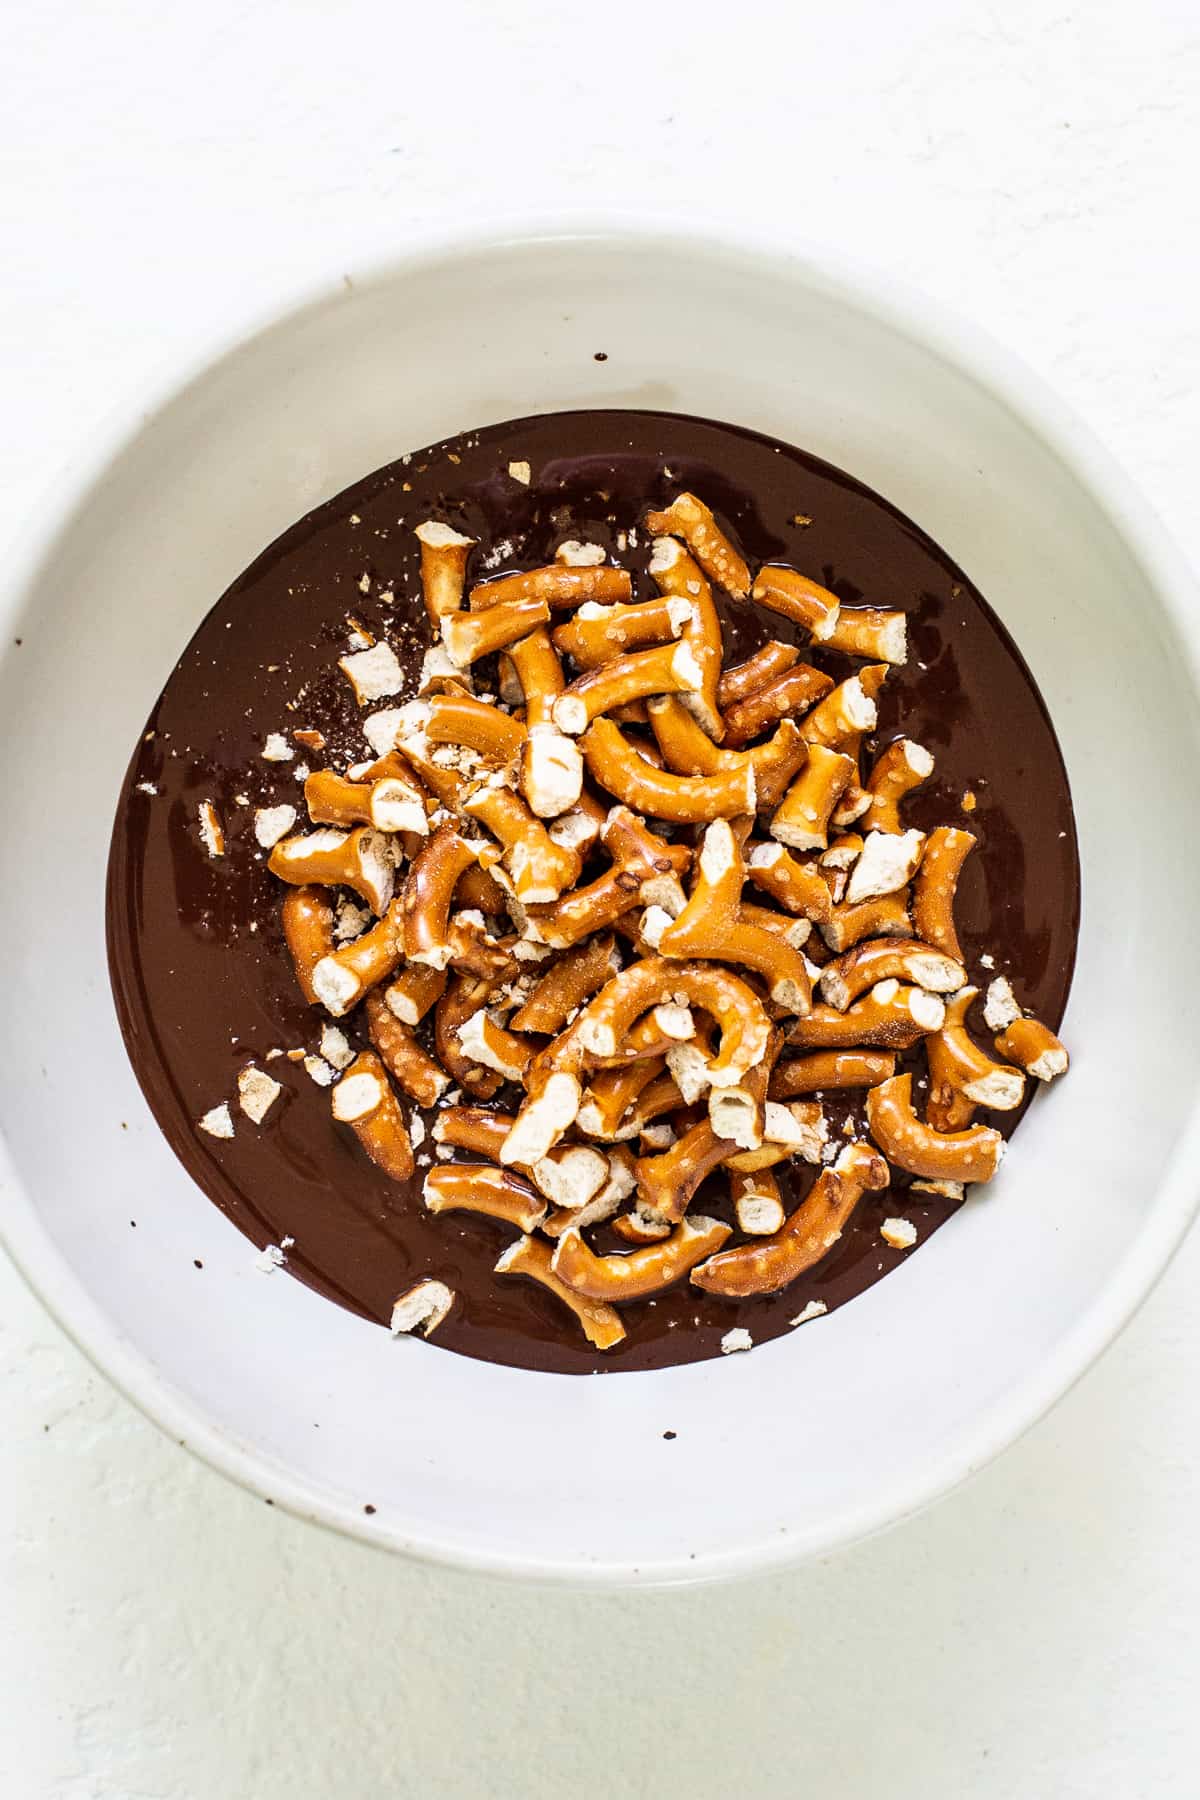 Chocolate pretzel topping in a bowl.